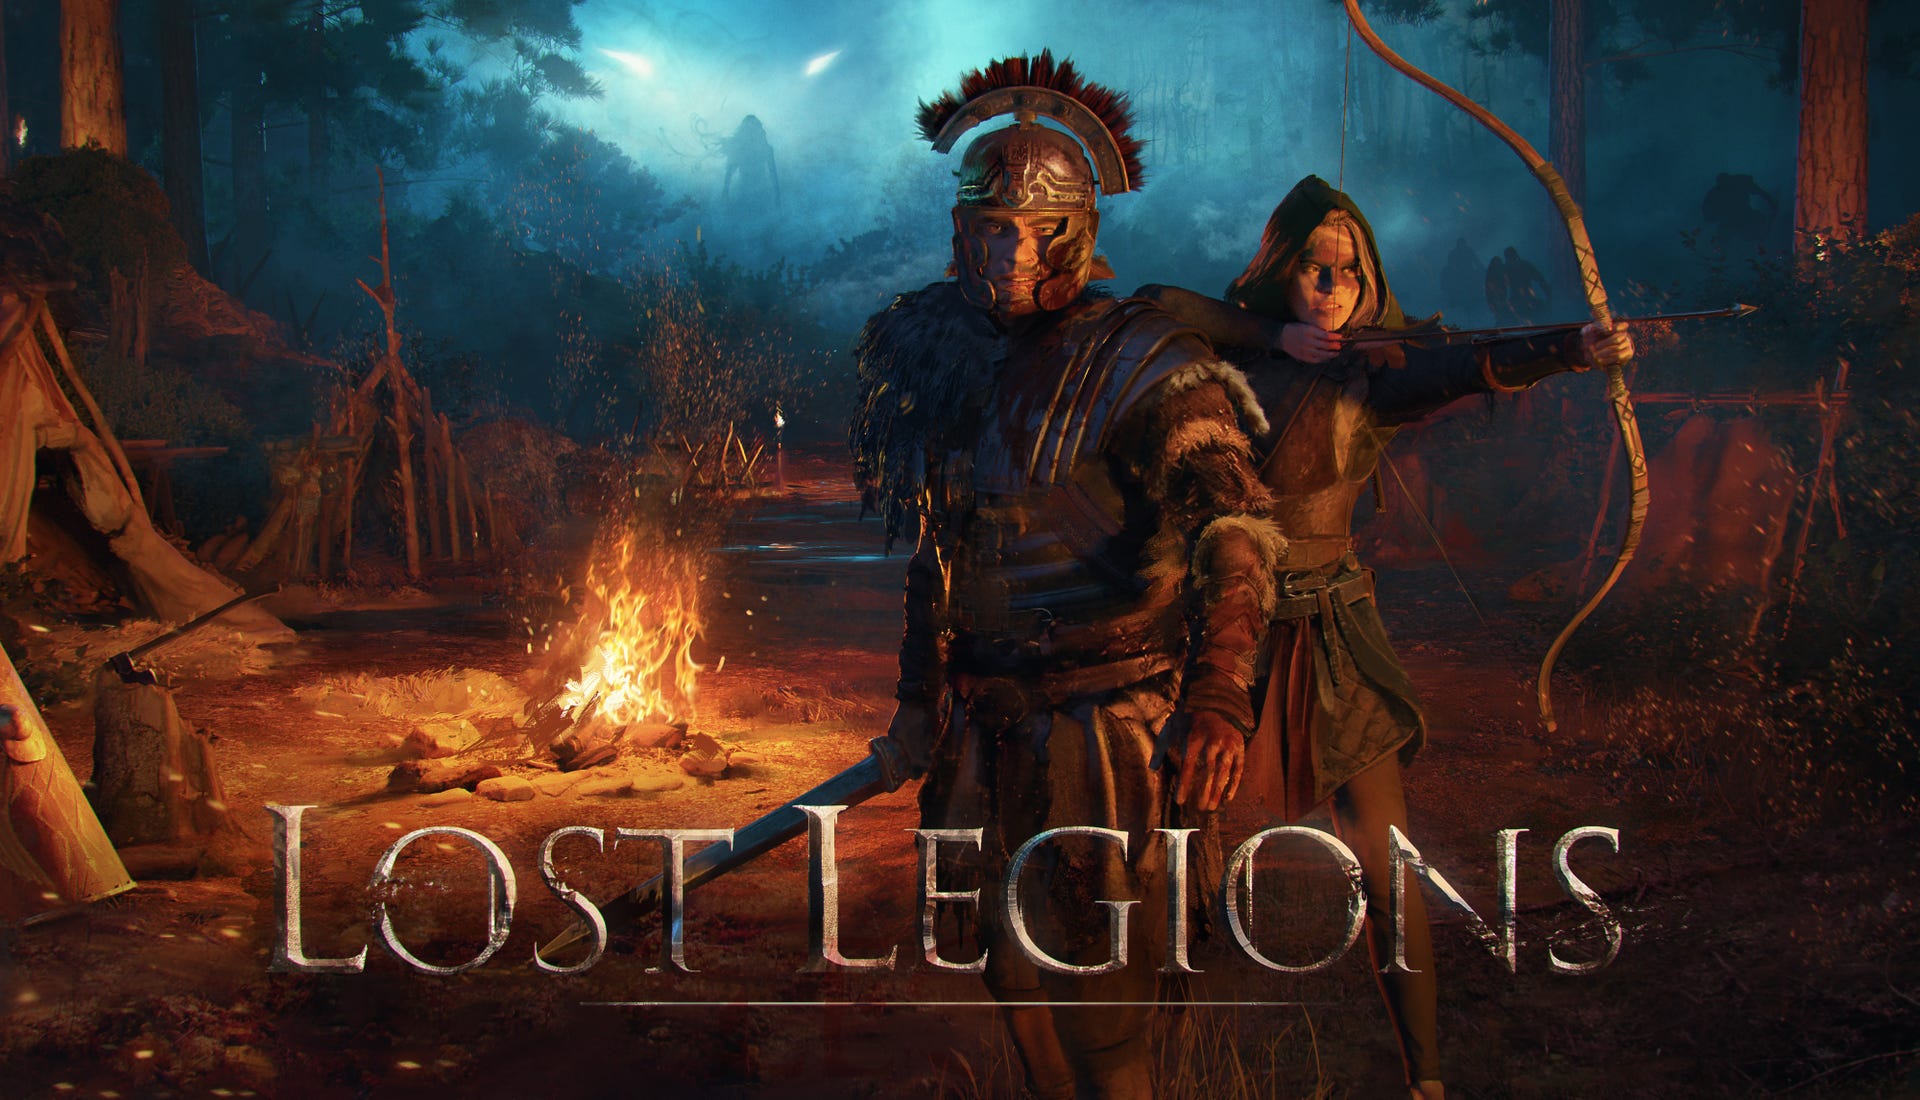 In new open world game Lost Legions you are a Roman "rebuilding the empire" behind enemy lines